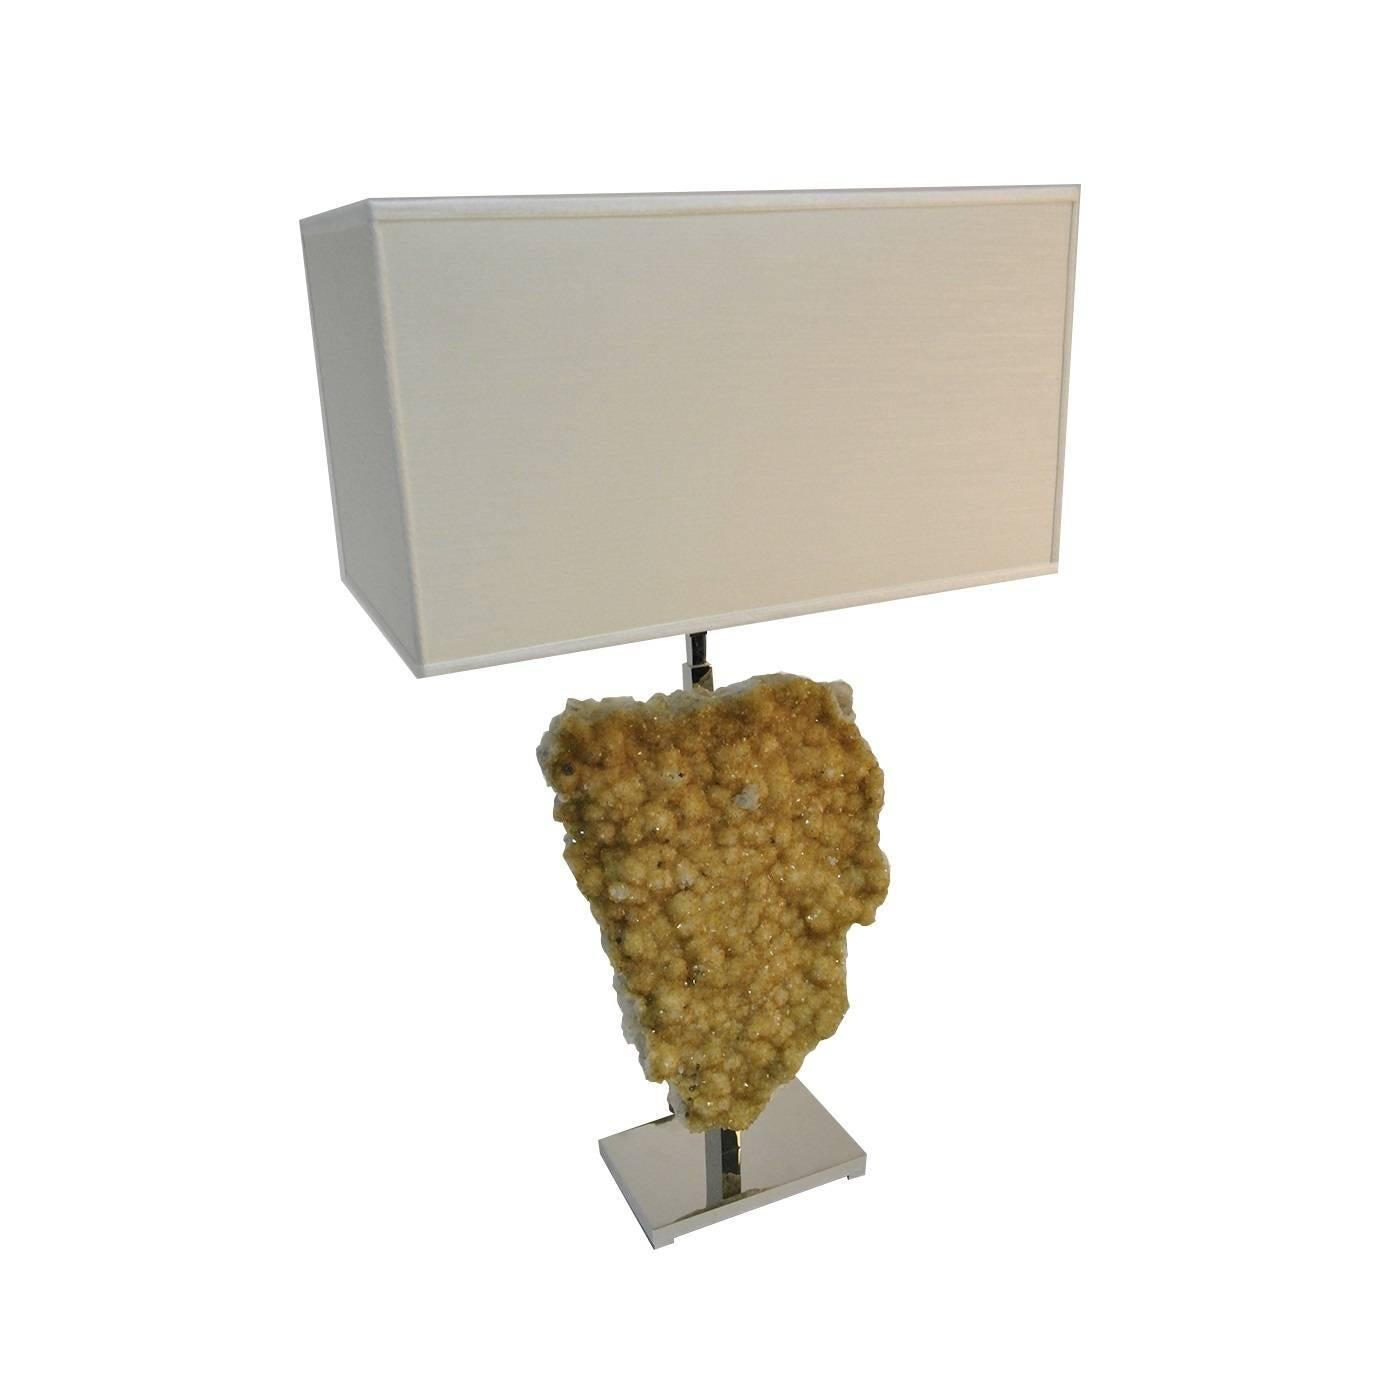 Having this jewel displayed in your home will immediately elevate the interior and ambiance of any room. The body of this exquisite lamp is crafted entirely from a hand-cut natural piece of Thermo Diffuse Citrine. The creamy white shade reflects the